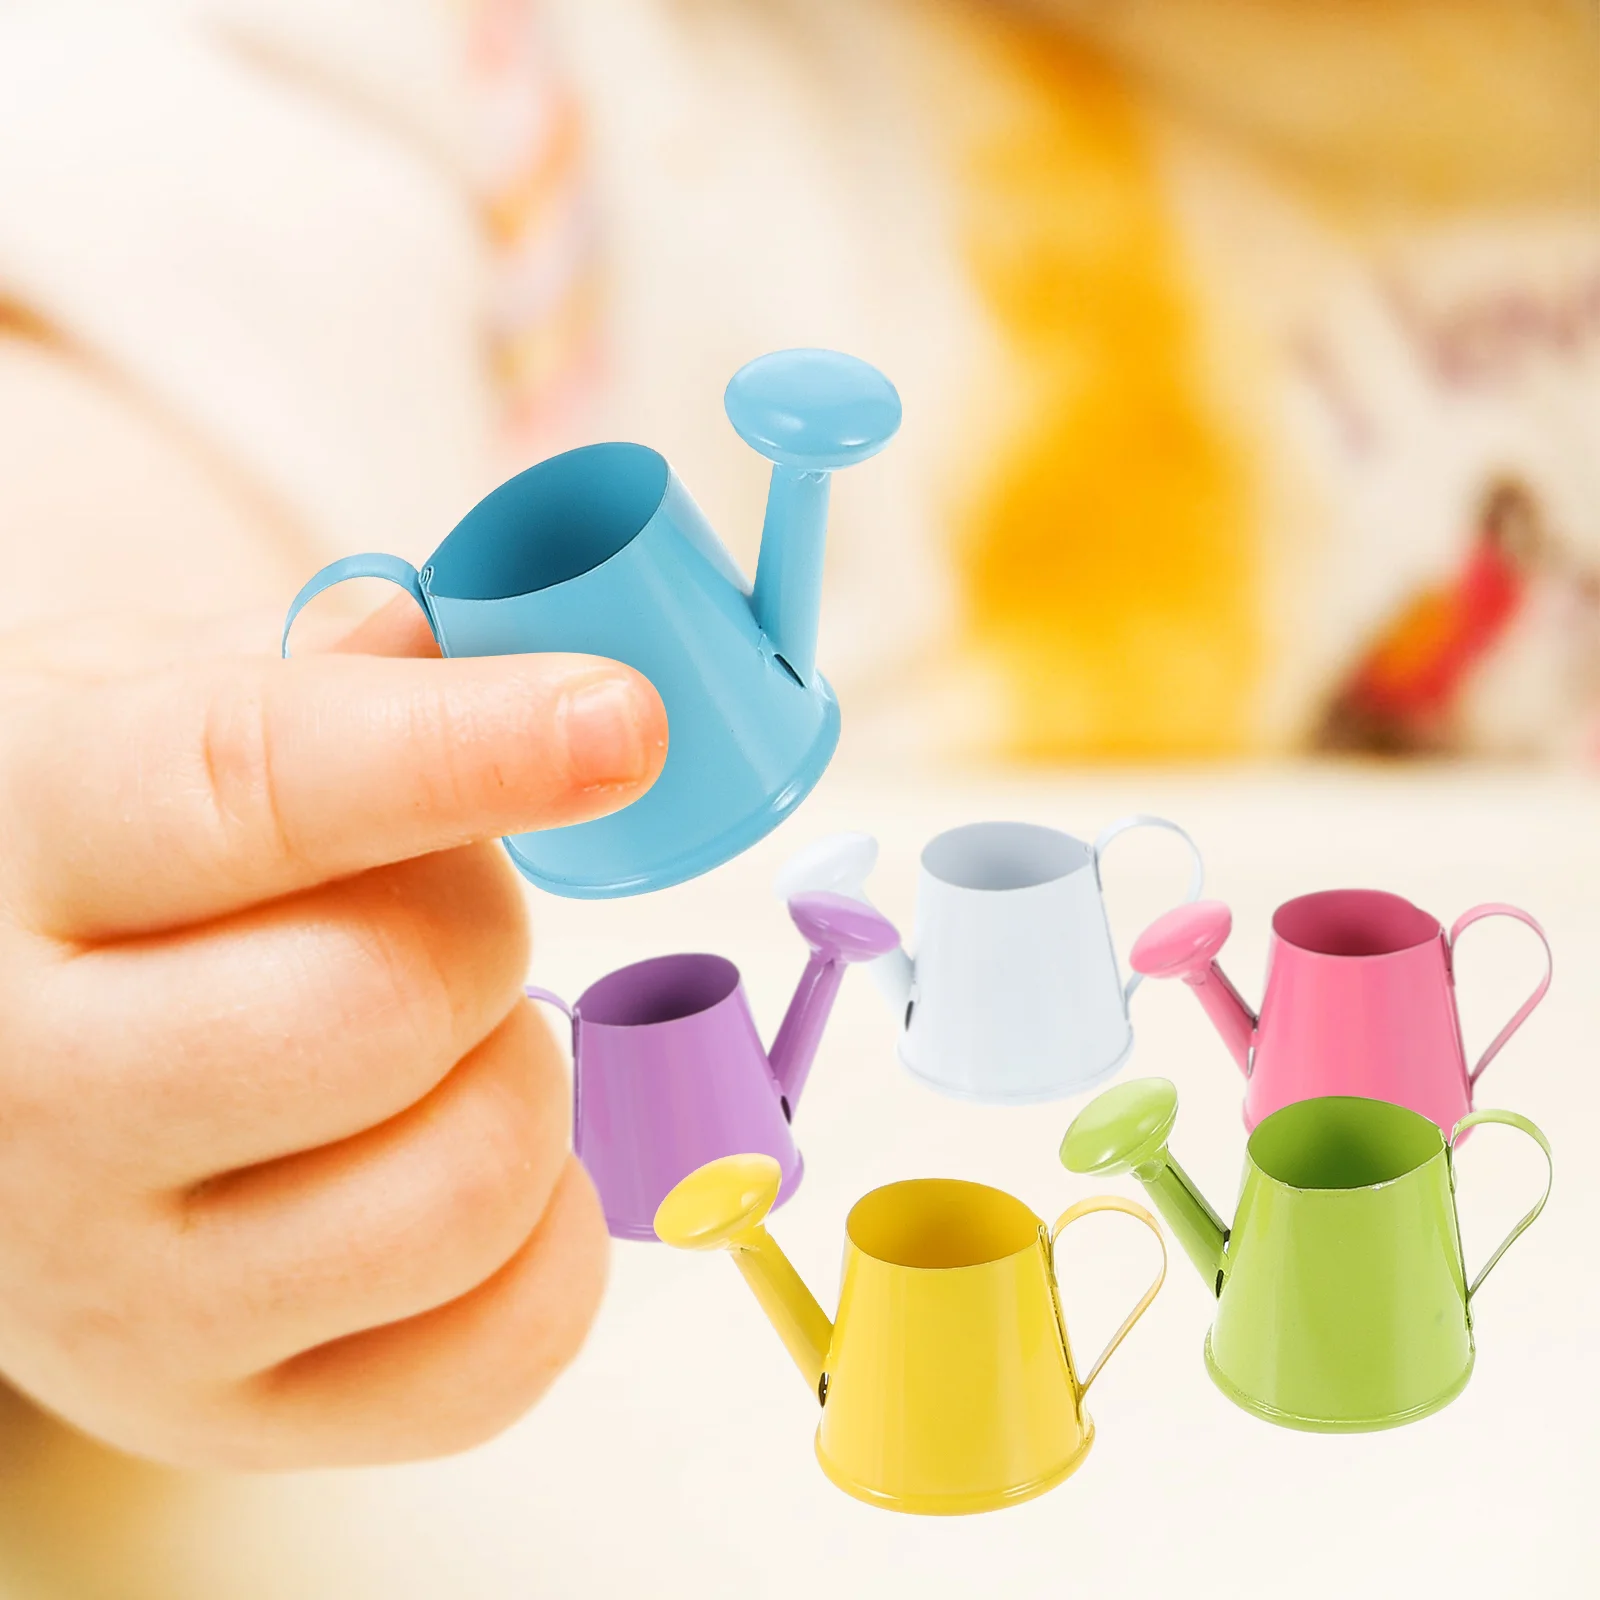 

6pcs Watering Can Ornaments Kettle Watering Pot Miniature Gardening Landscape Decor ( Mixed Color )